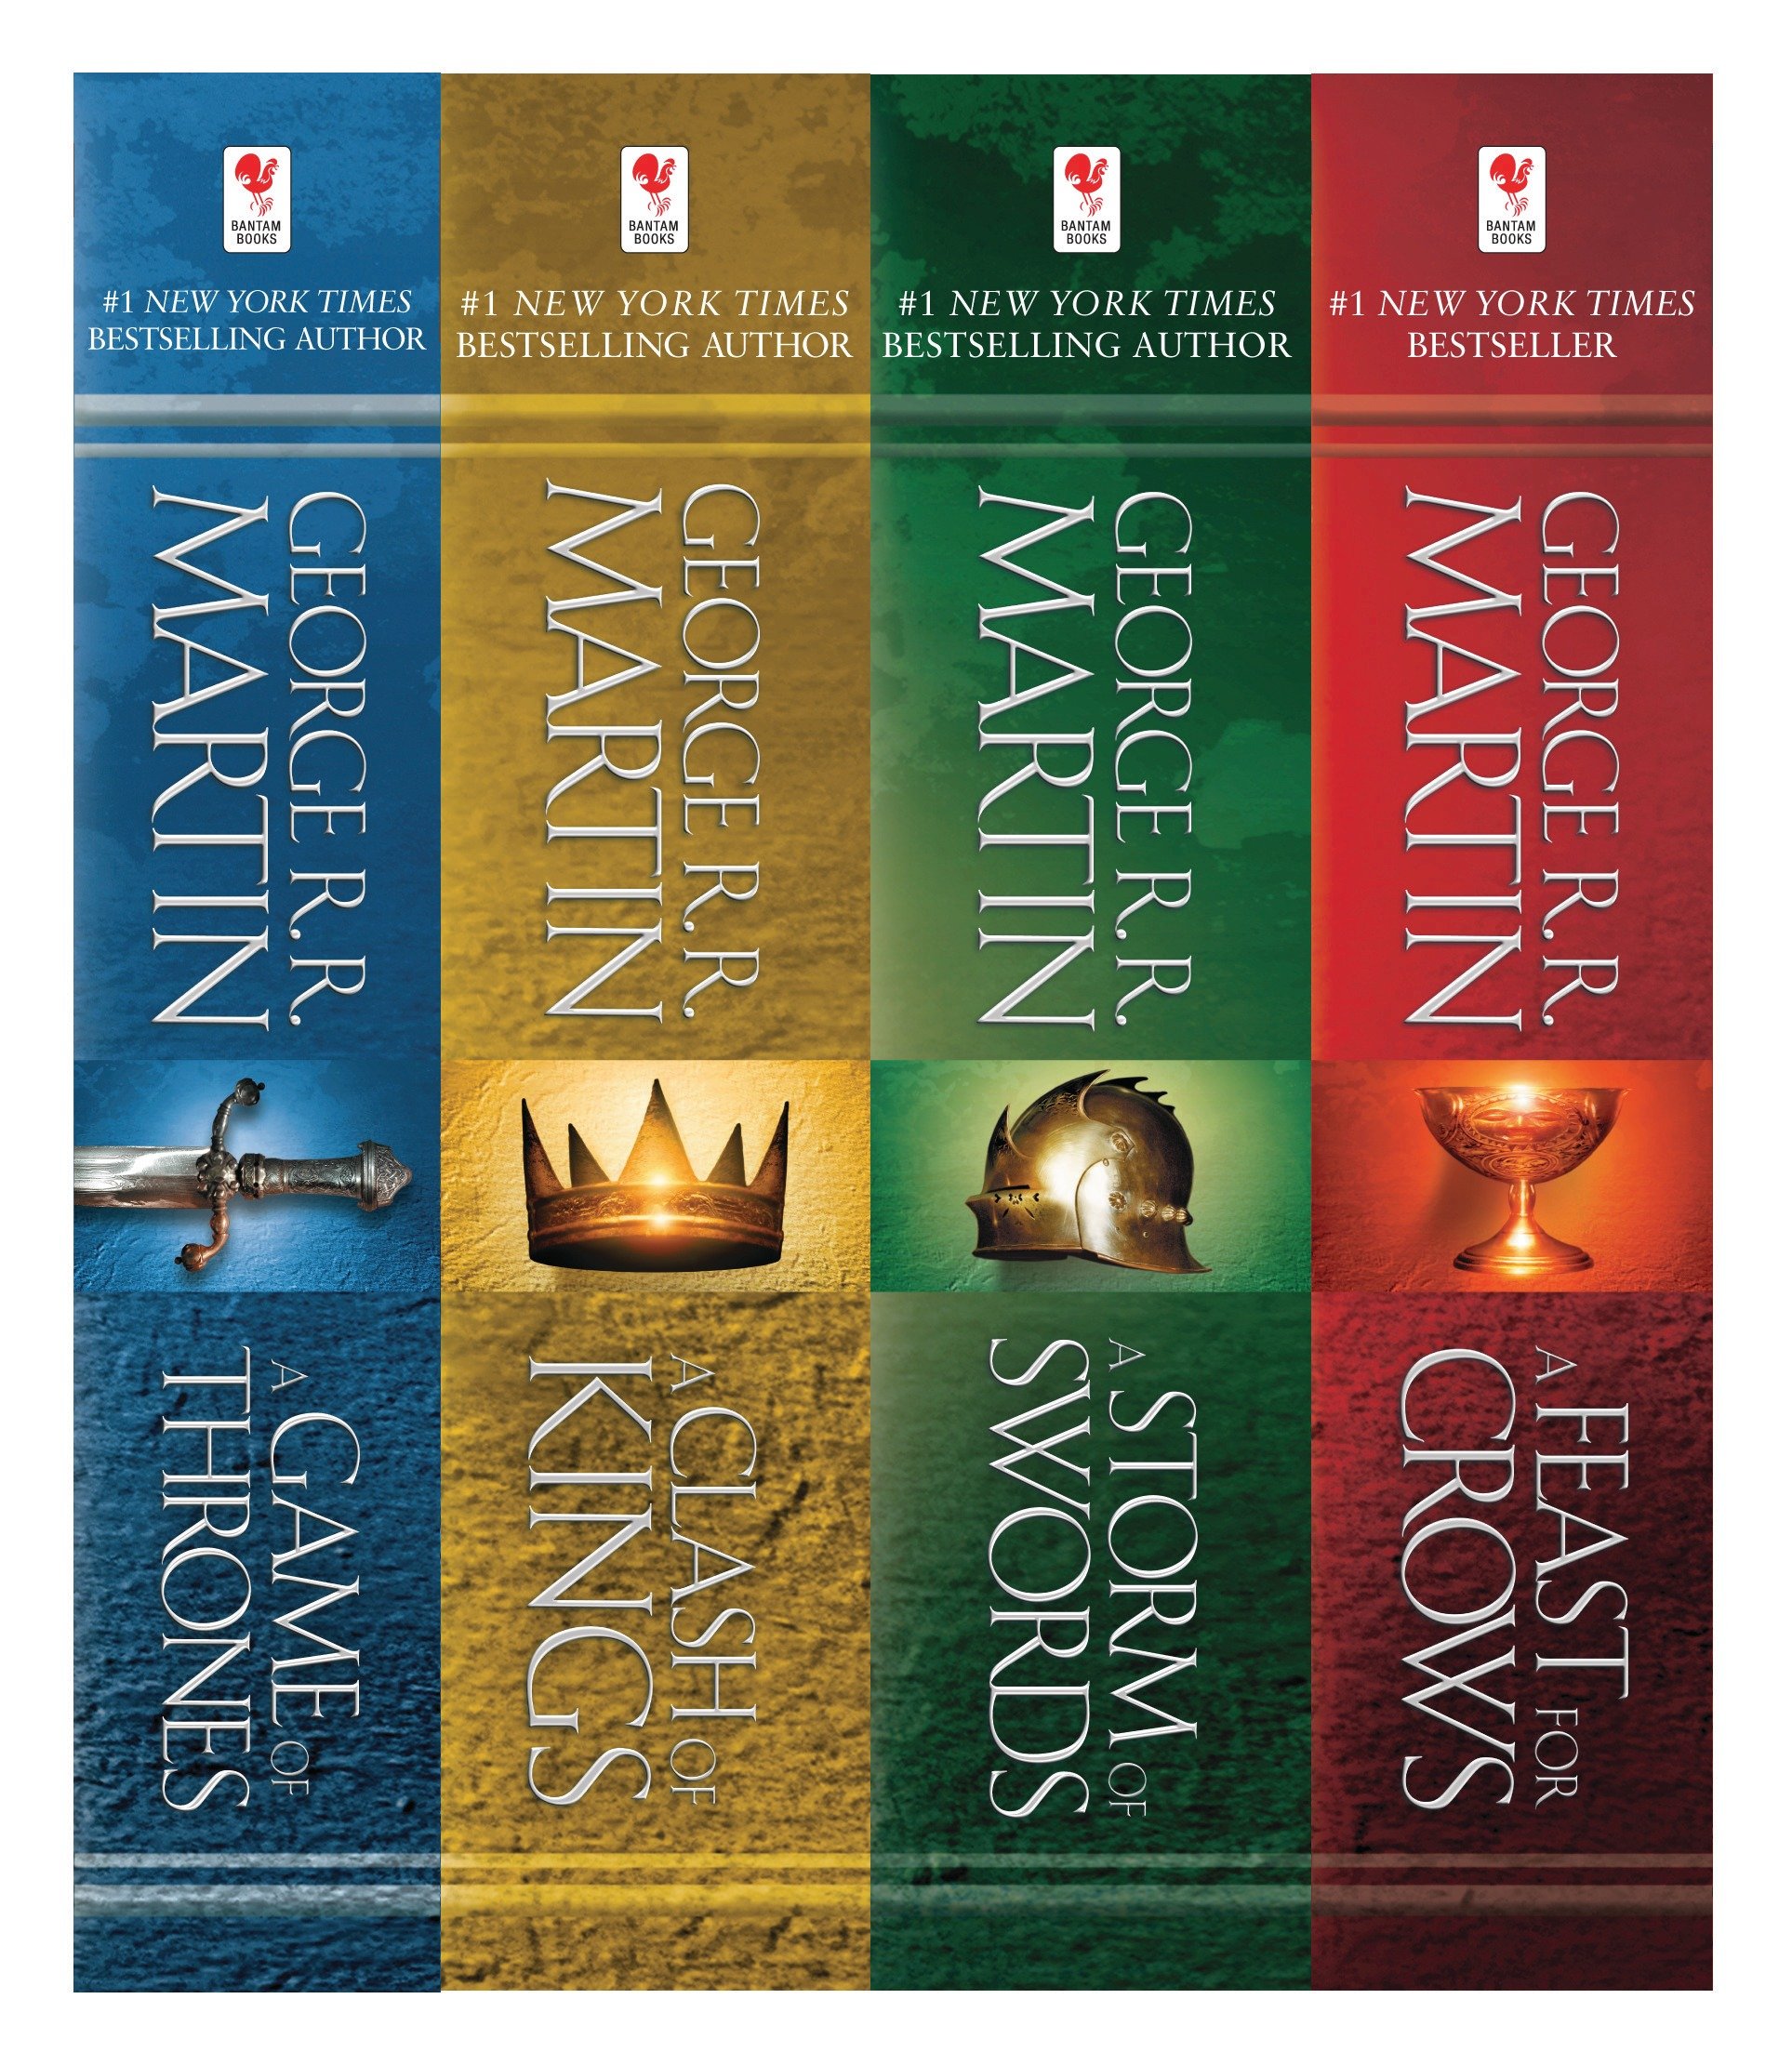 Image de couverture de A Game of Thrones 4-Book Bundle [electronic resource] : A Song of Ice and Fire Series: A Game of Thrones, A Clash of Kings, A Storm of Swords, and A Feast for Crows